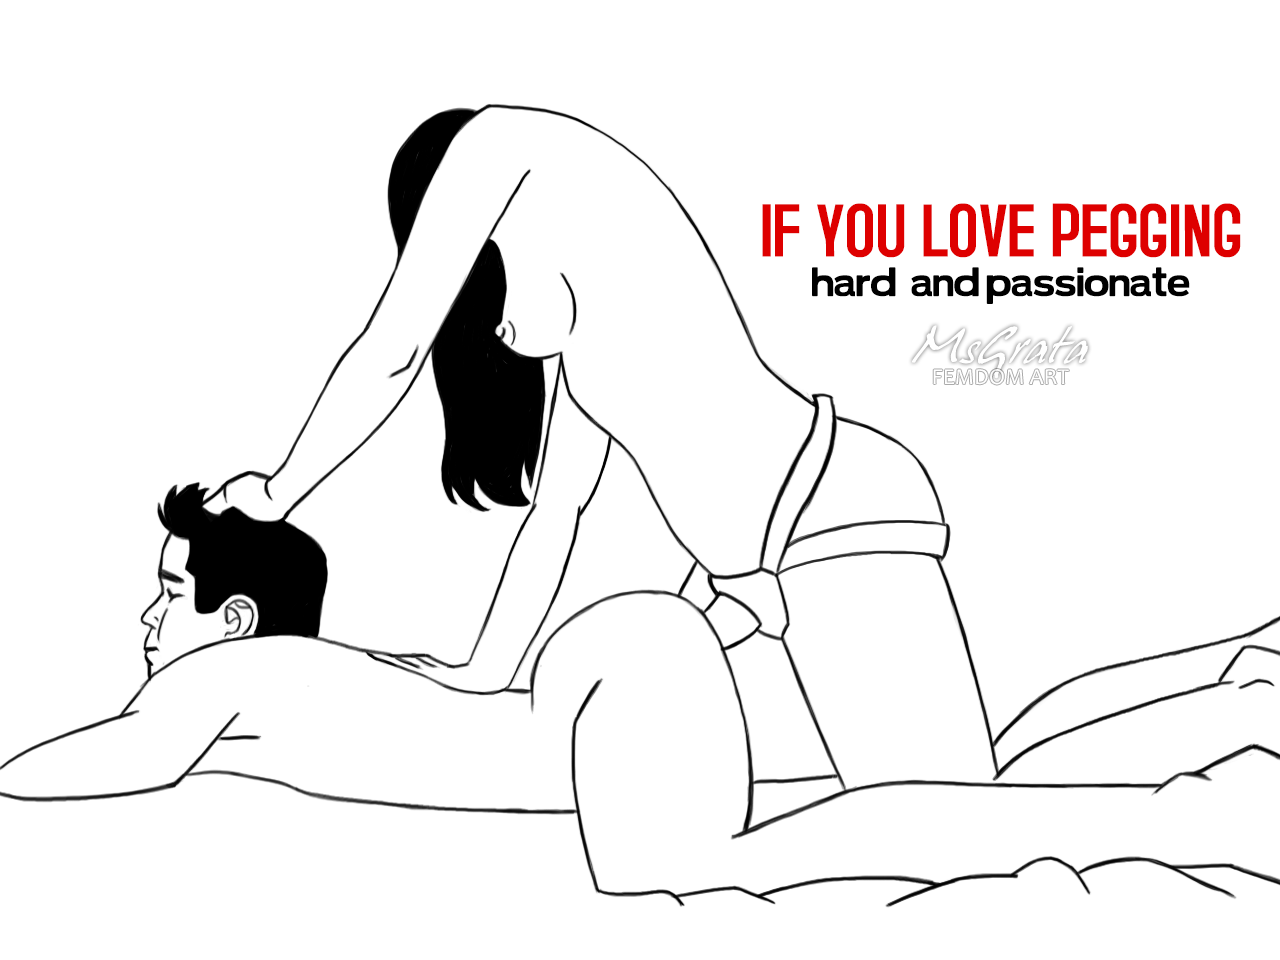 Love For Hard and Passionate Pegging strap-on femdom art animation by MsGrata